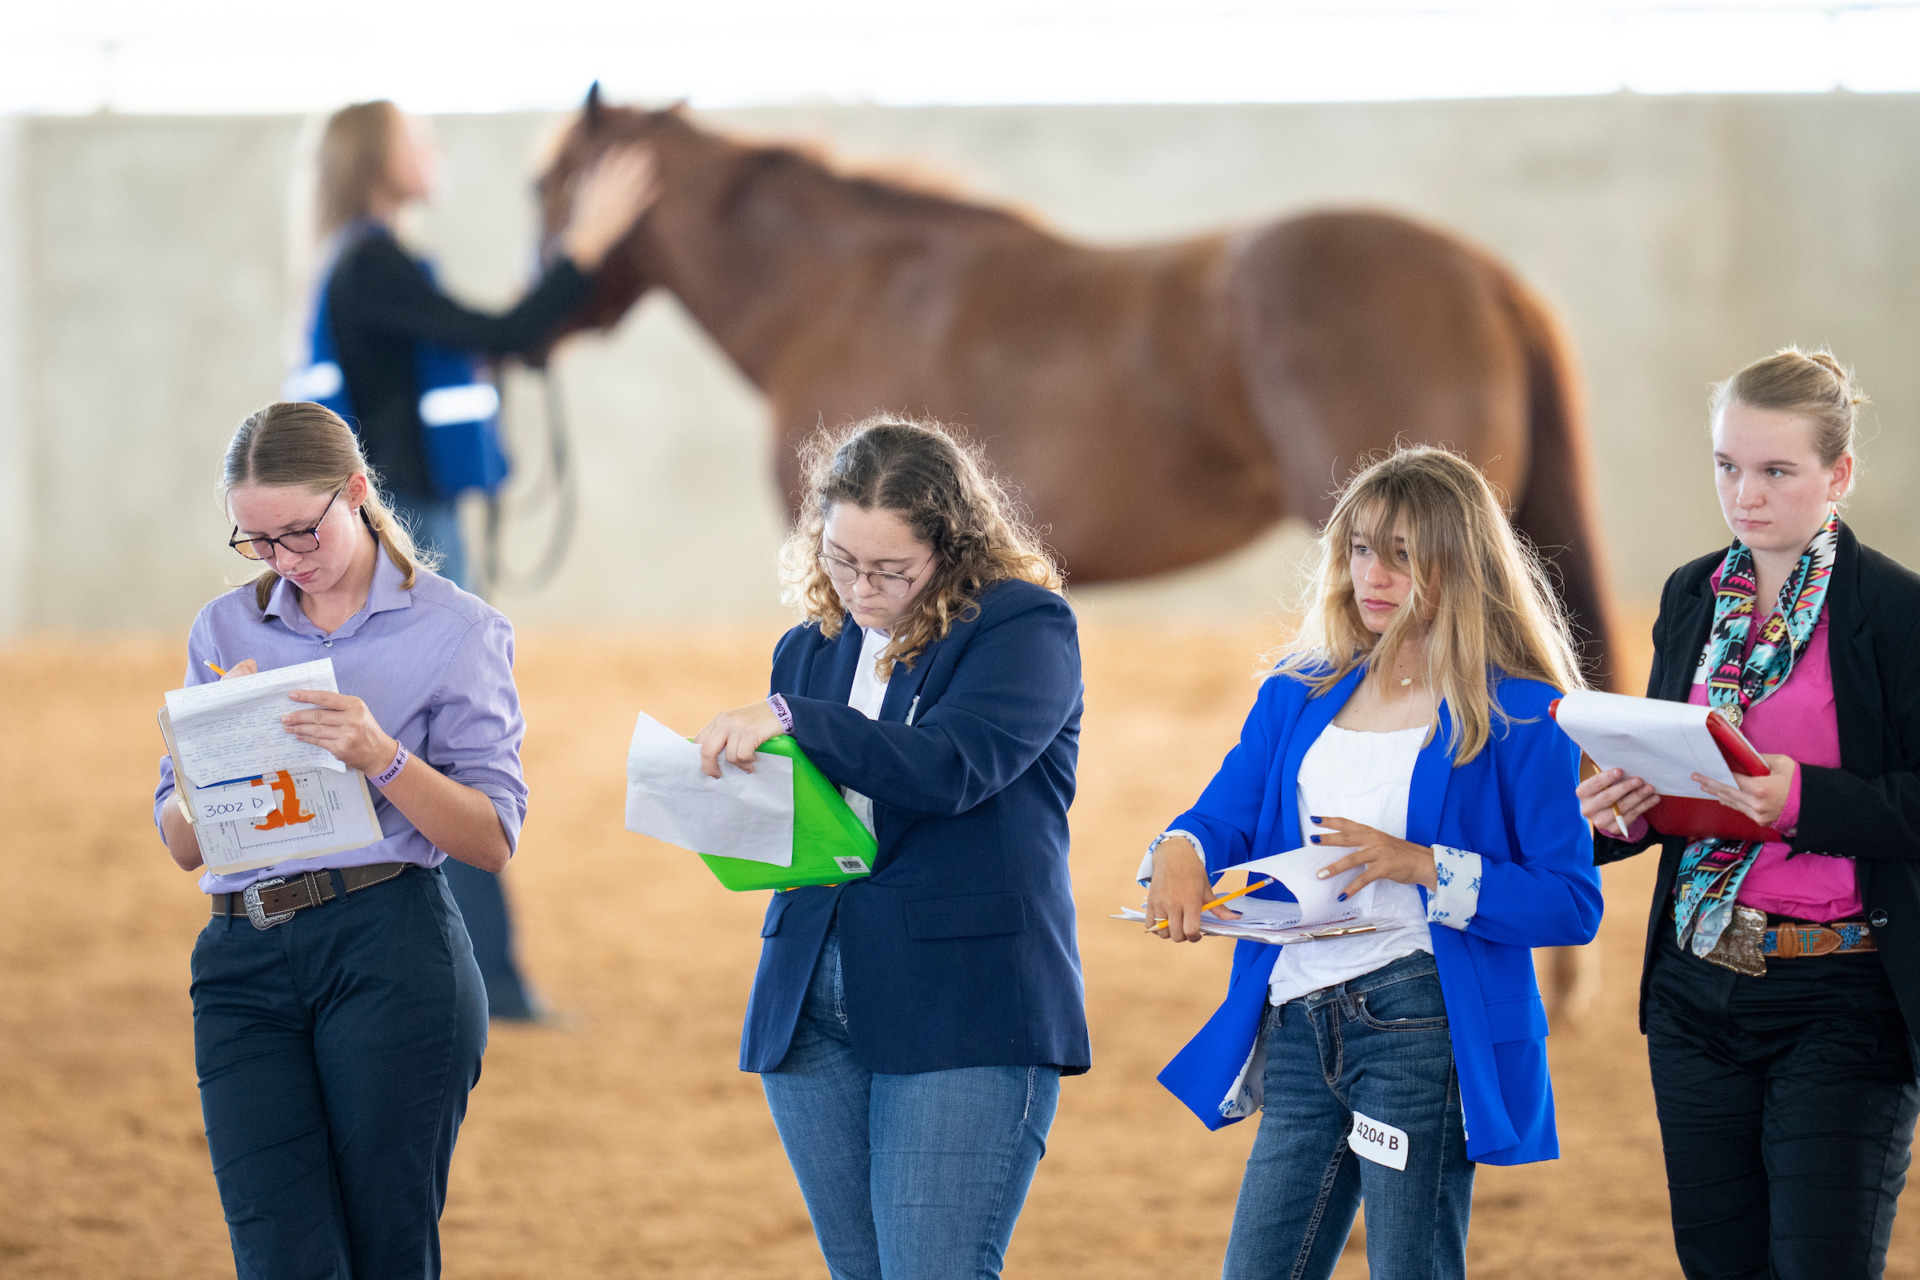 2023 West District 4-H Qualifying Horse Show